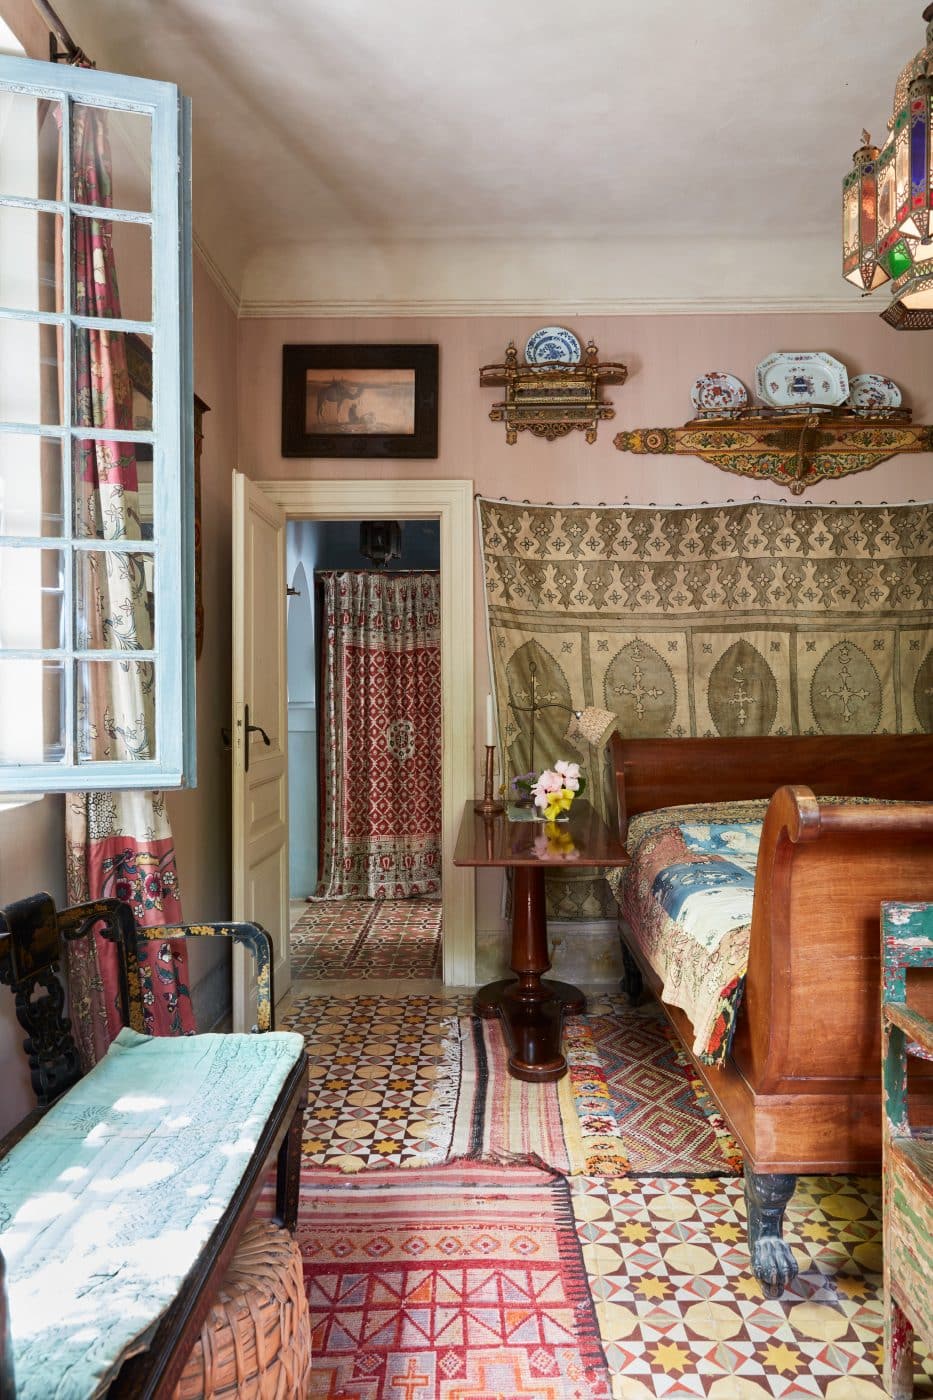 Algerian Room guest bedroom at home of Umberto Pasti and Stephan Janson as featured in the Rizzoli book The House of a Lifetime: A Collector's Journey in Tangier Morocco 